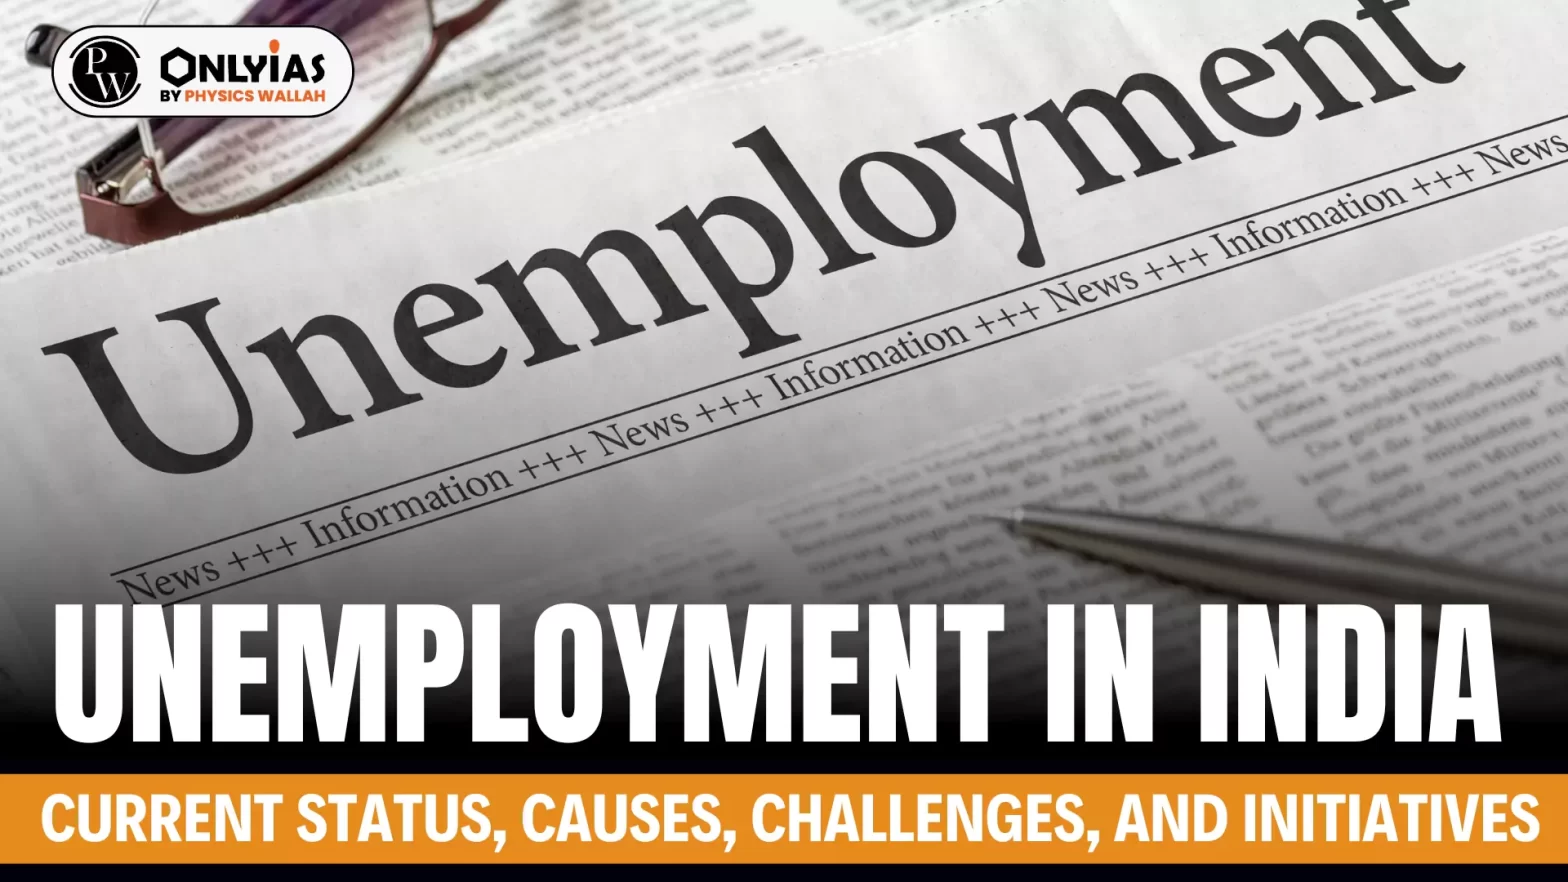 Unemployment In India: Current Status, Causes, Challenges, and Initiatives